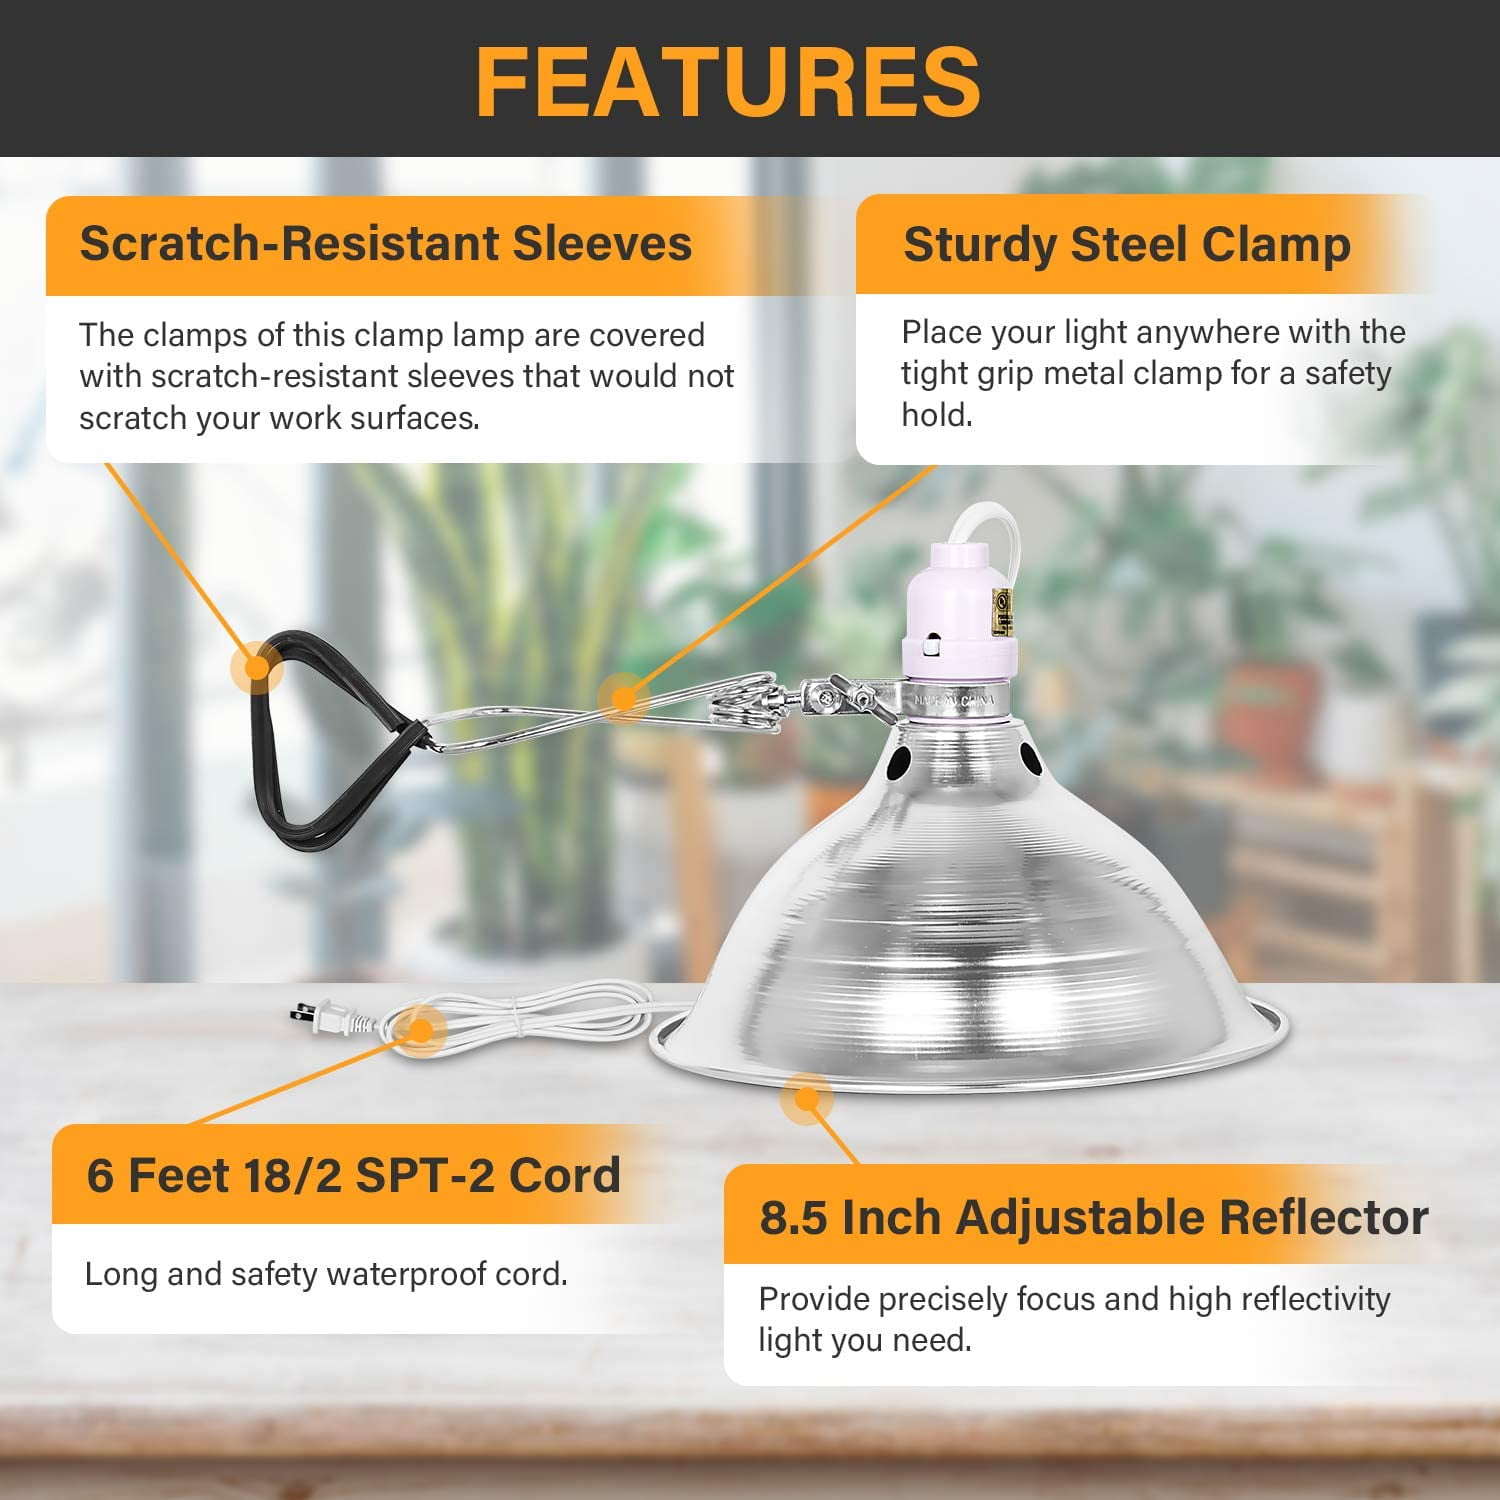 no Bulb Included Simple Deluxe HIWKLTCLAMPLIGHTMX6 6-Pack Clamp Lamp Light with 8.5 Inch Aluminum Reflector up to 150 Watt E26 6 Feet 18/2 SPT-2 Cord UL Listed 